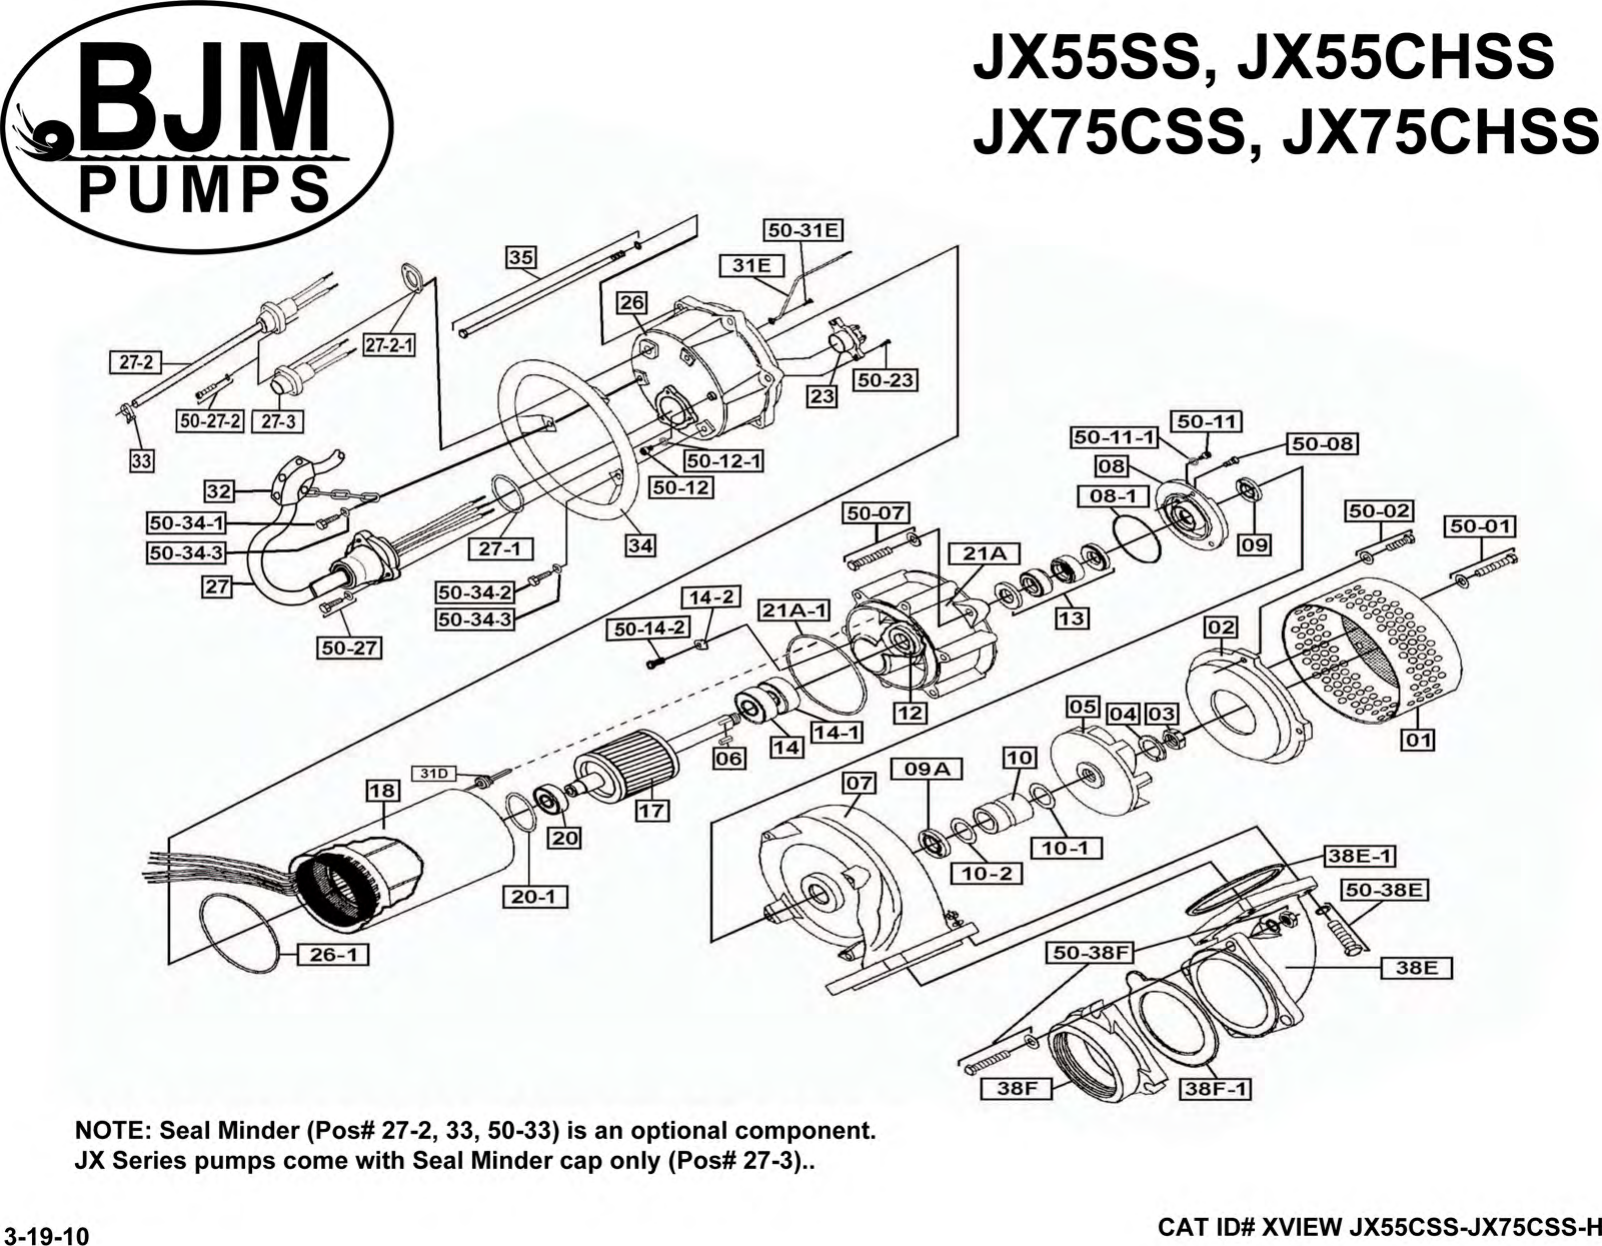 Page 5 of 5 - 136178 6 Bjm Jxh Series Exploded View User Manual